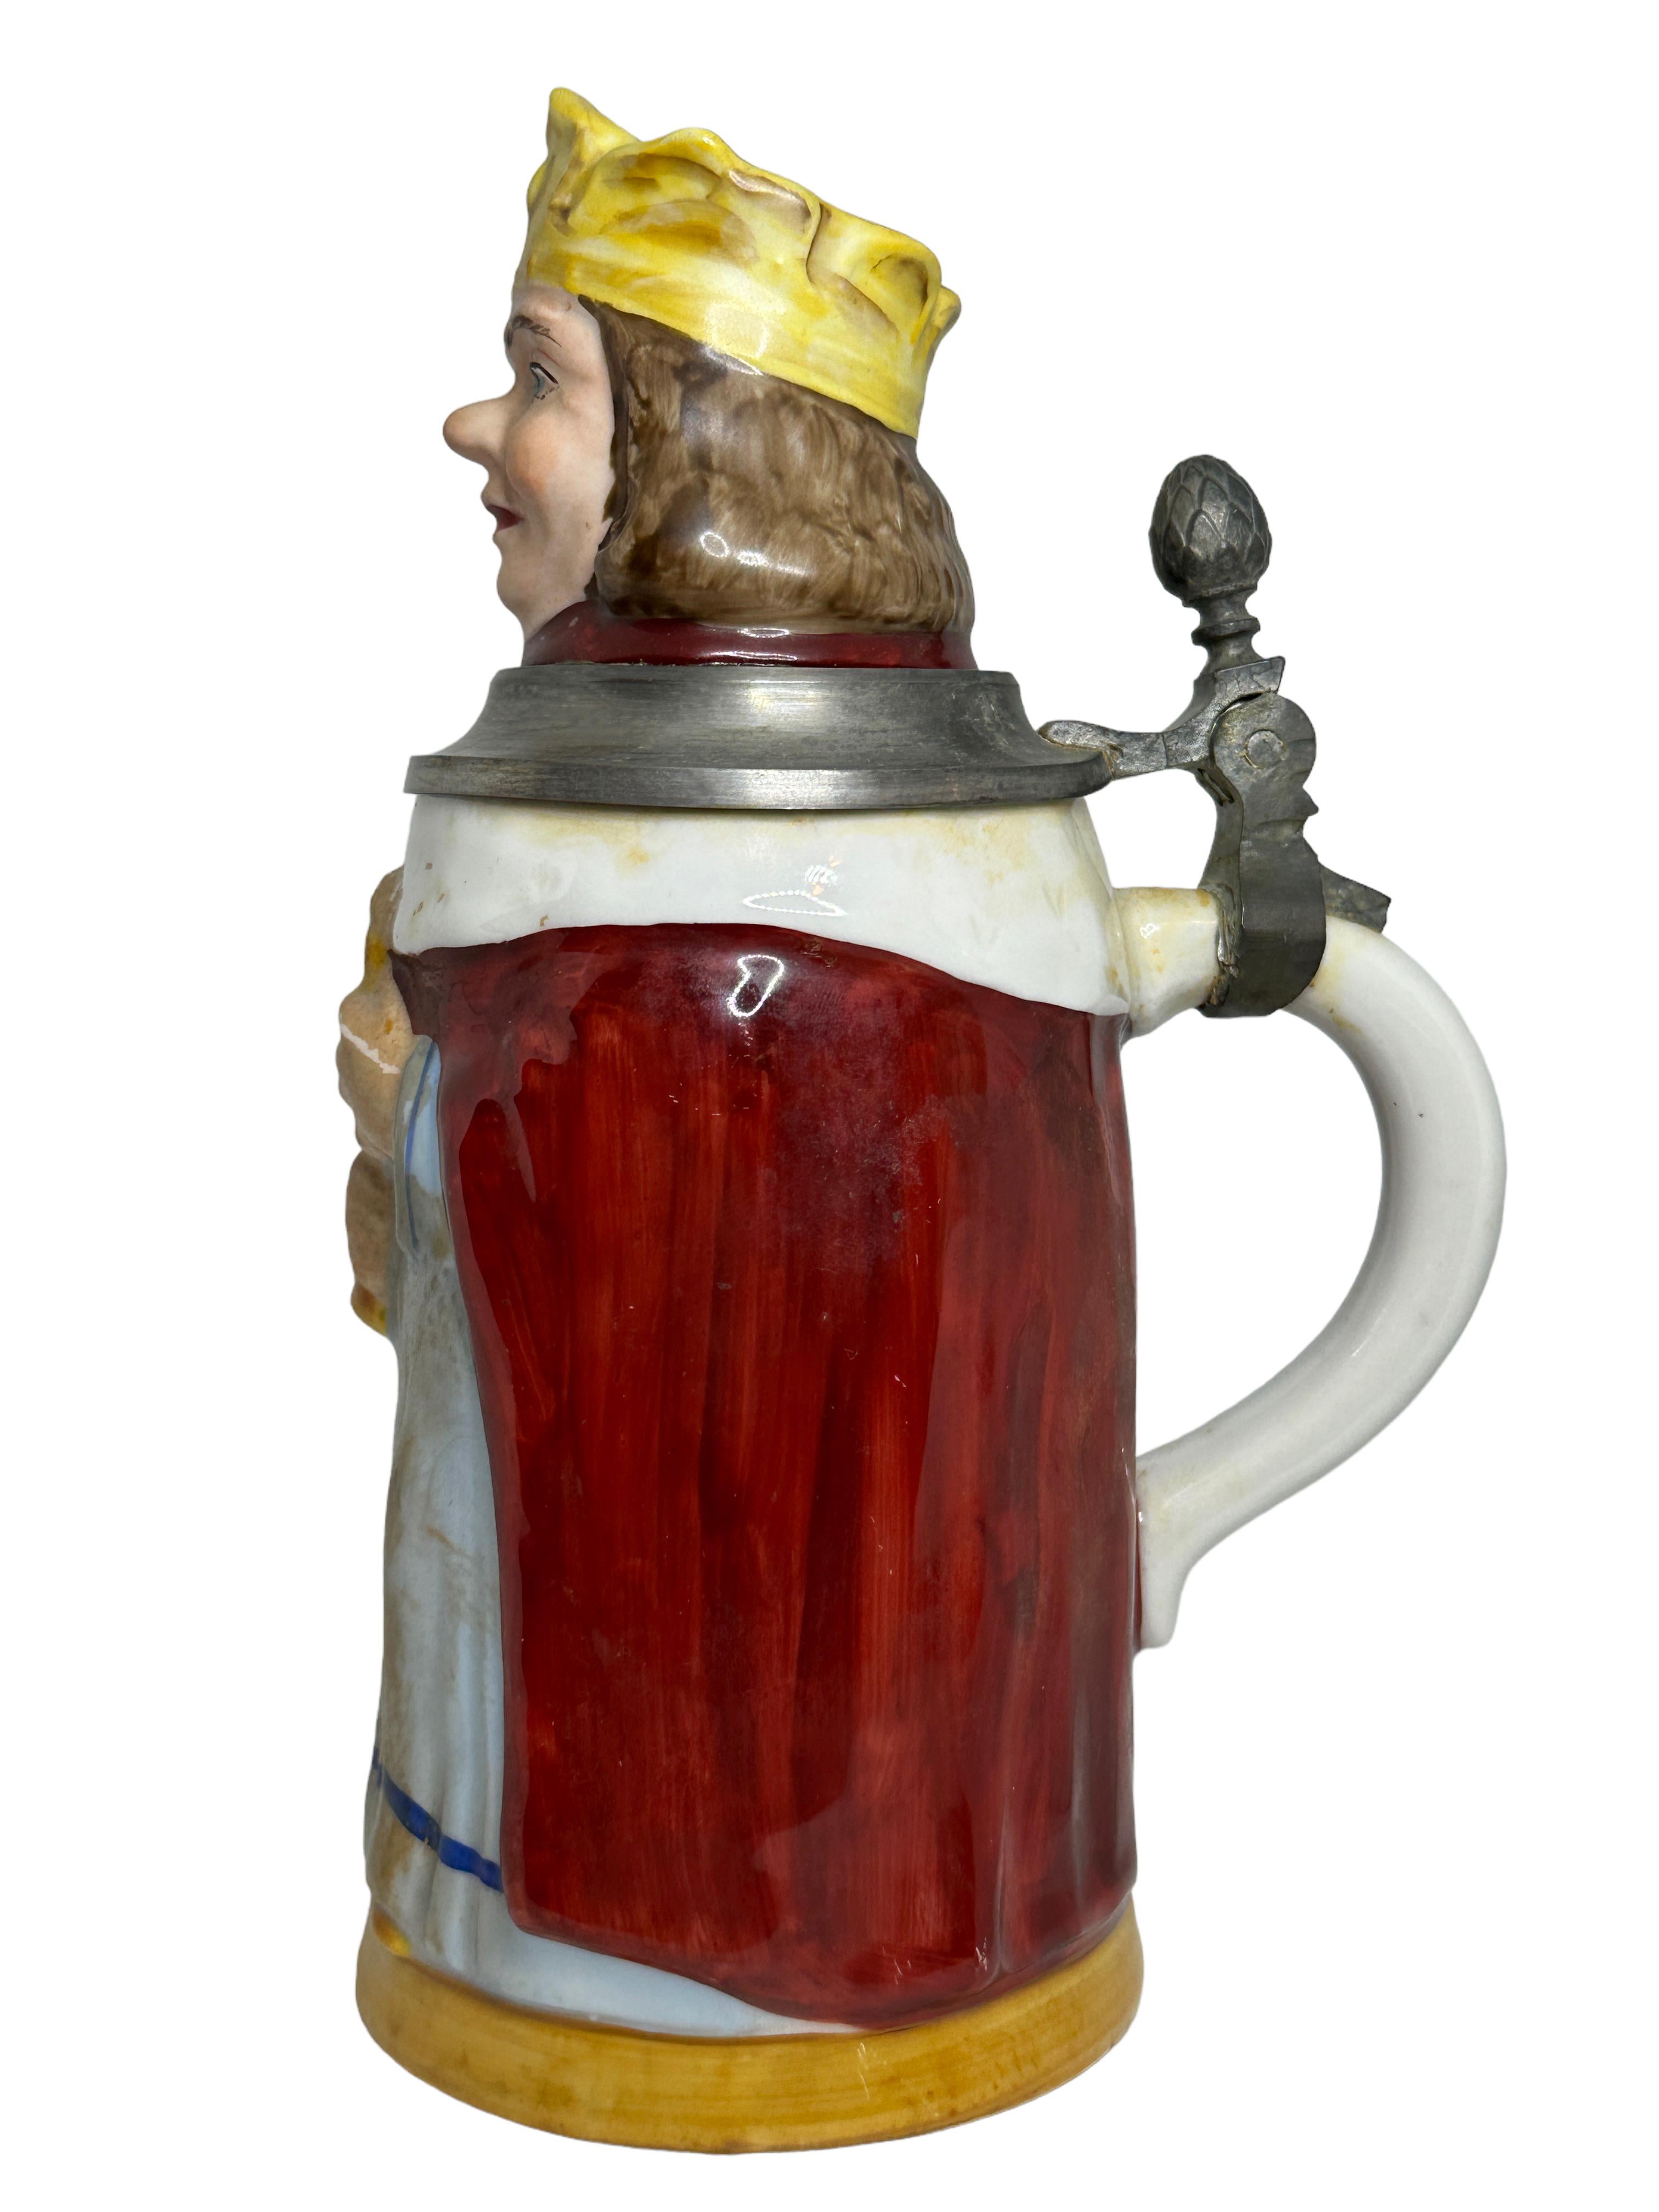 A gorgeous character beer stein - King. This character beer stein has been made in Germany circa 1930s or older, attributed to E. Bohne, Thuringia Germany. Absolutely gorgeous piece hand painted and still in great condition. Lid works properly. Nice